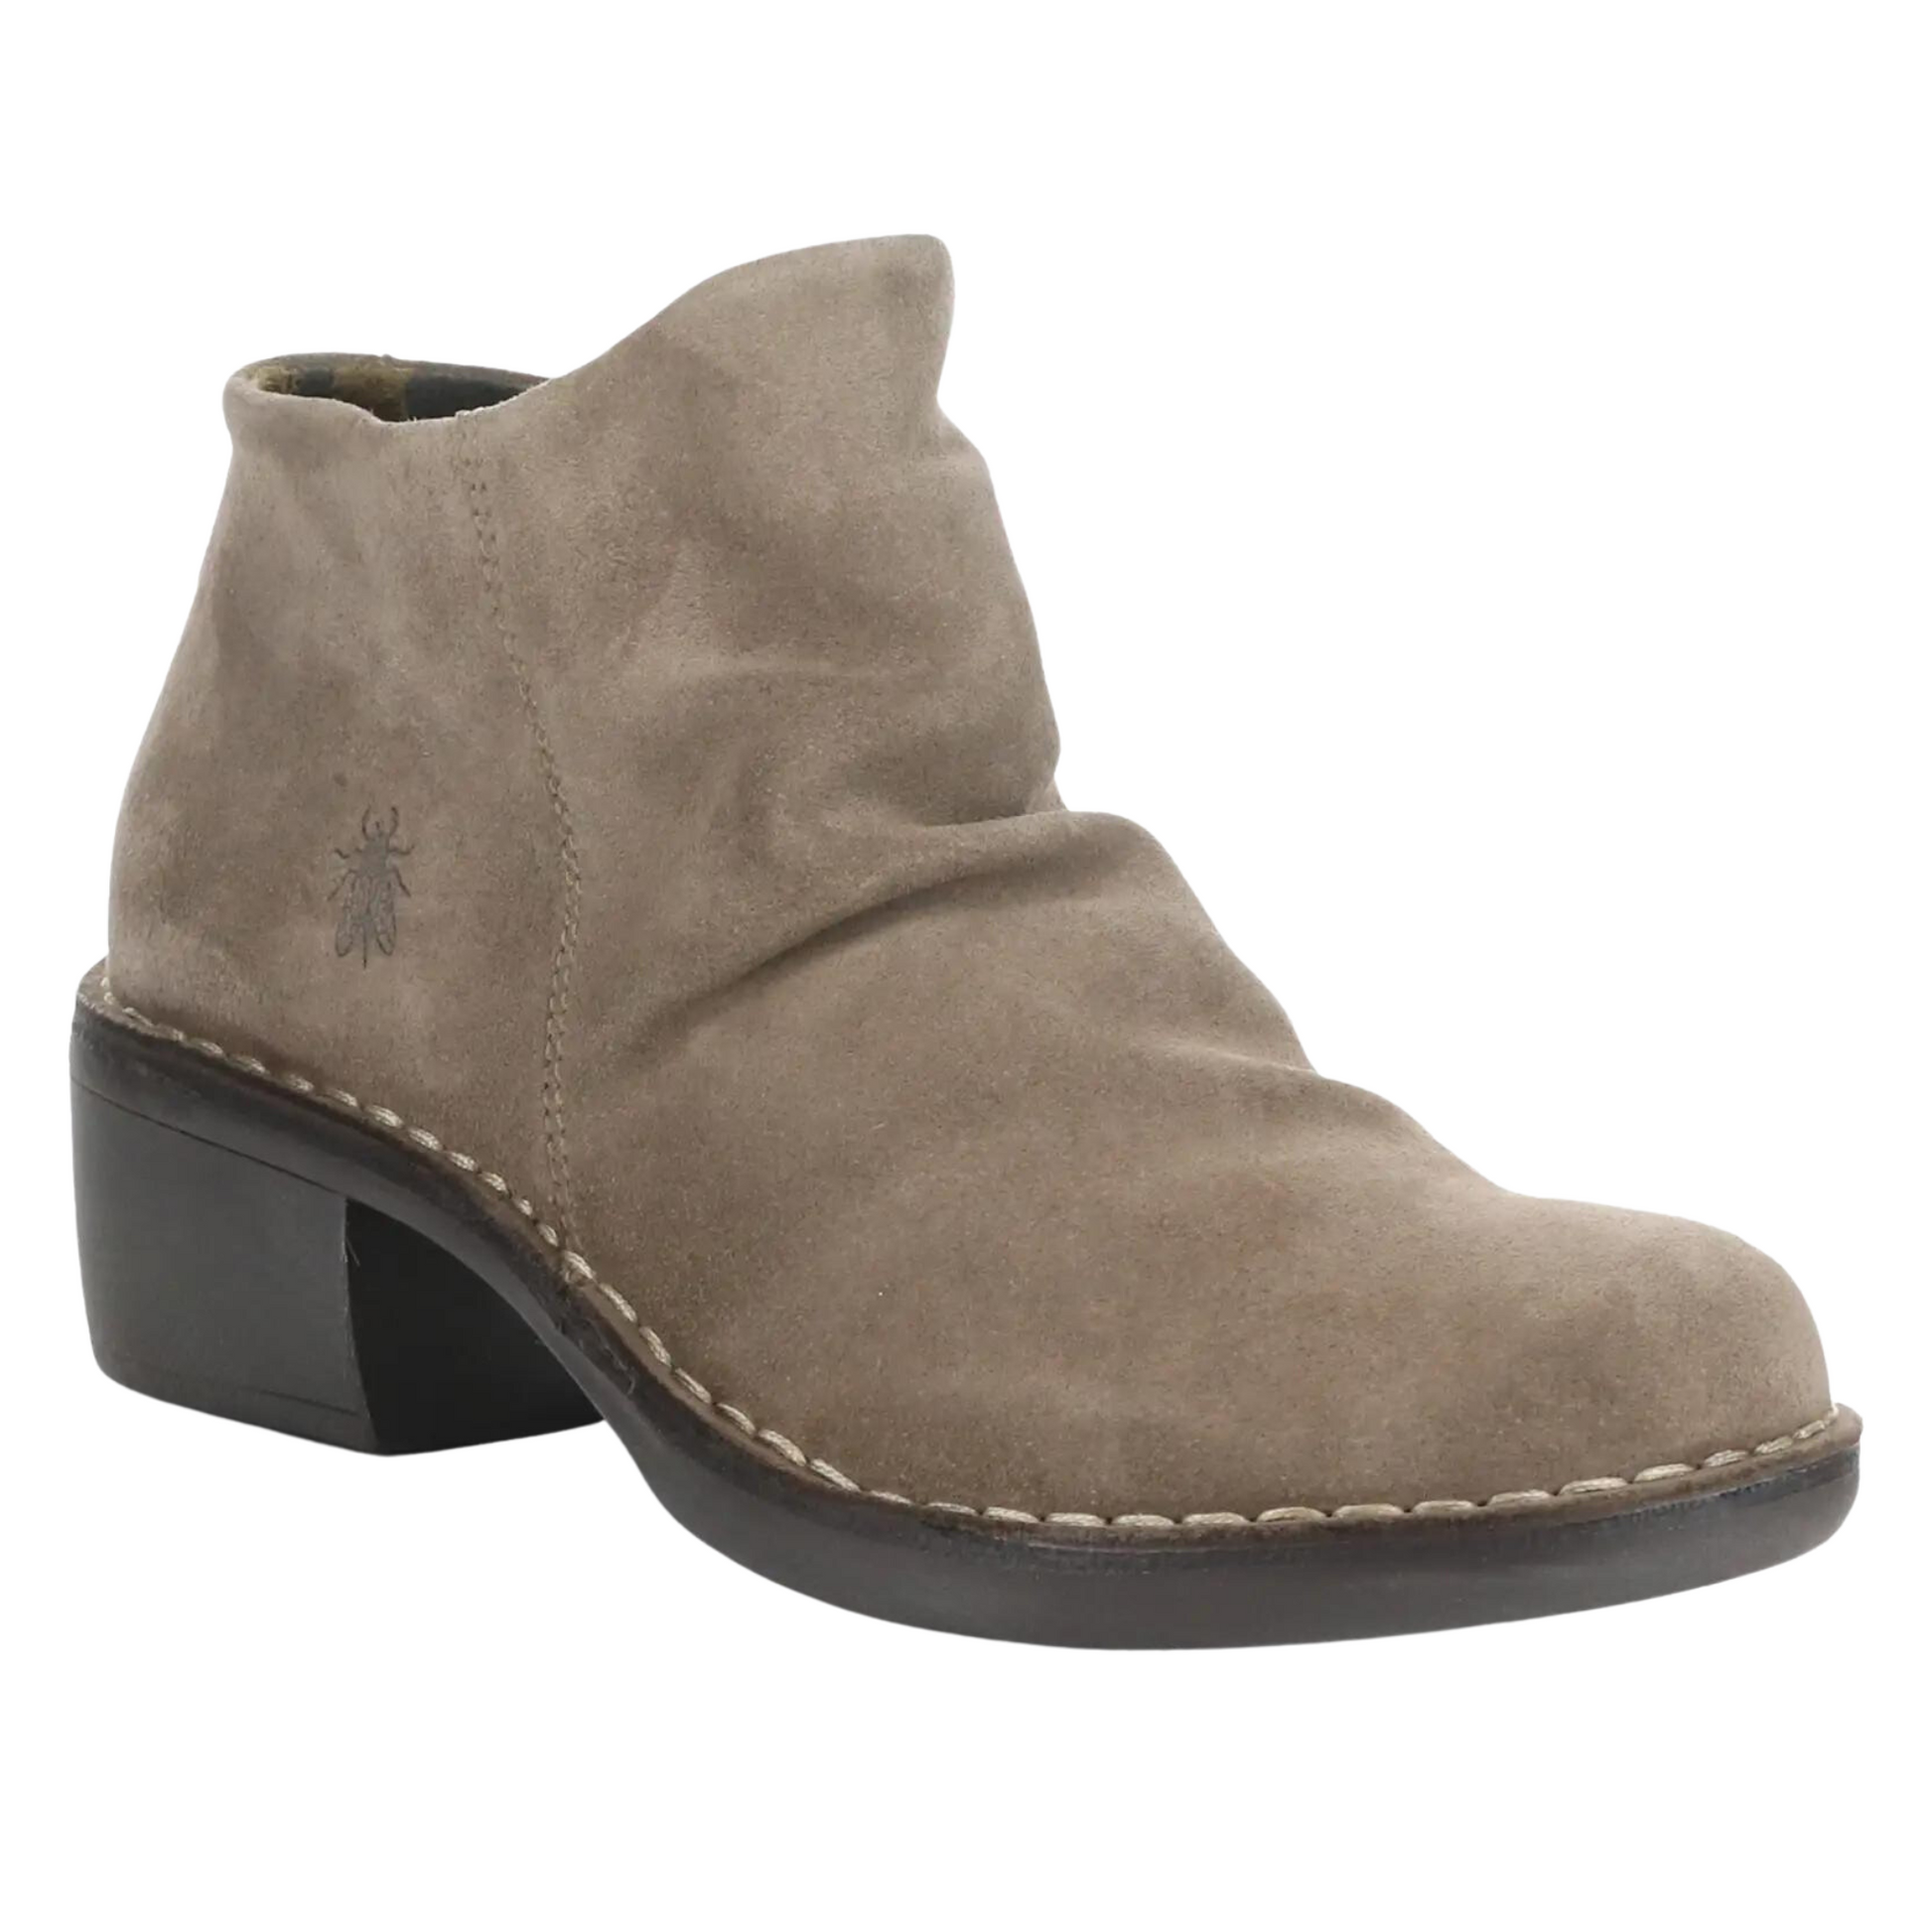 Front angled profile of the Fly London Merk Boot in the colour Taupe.